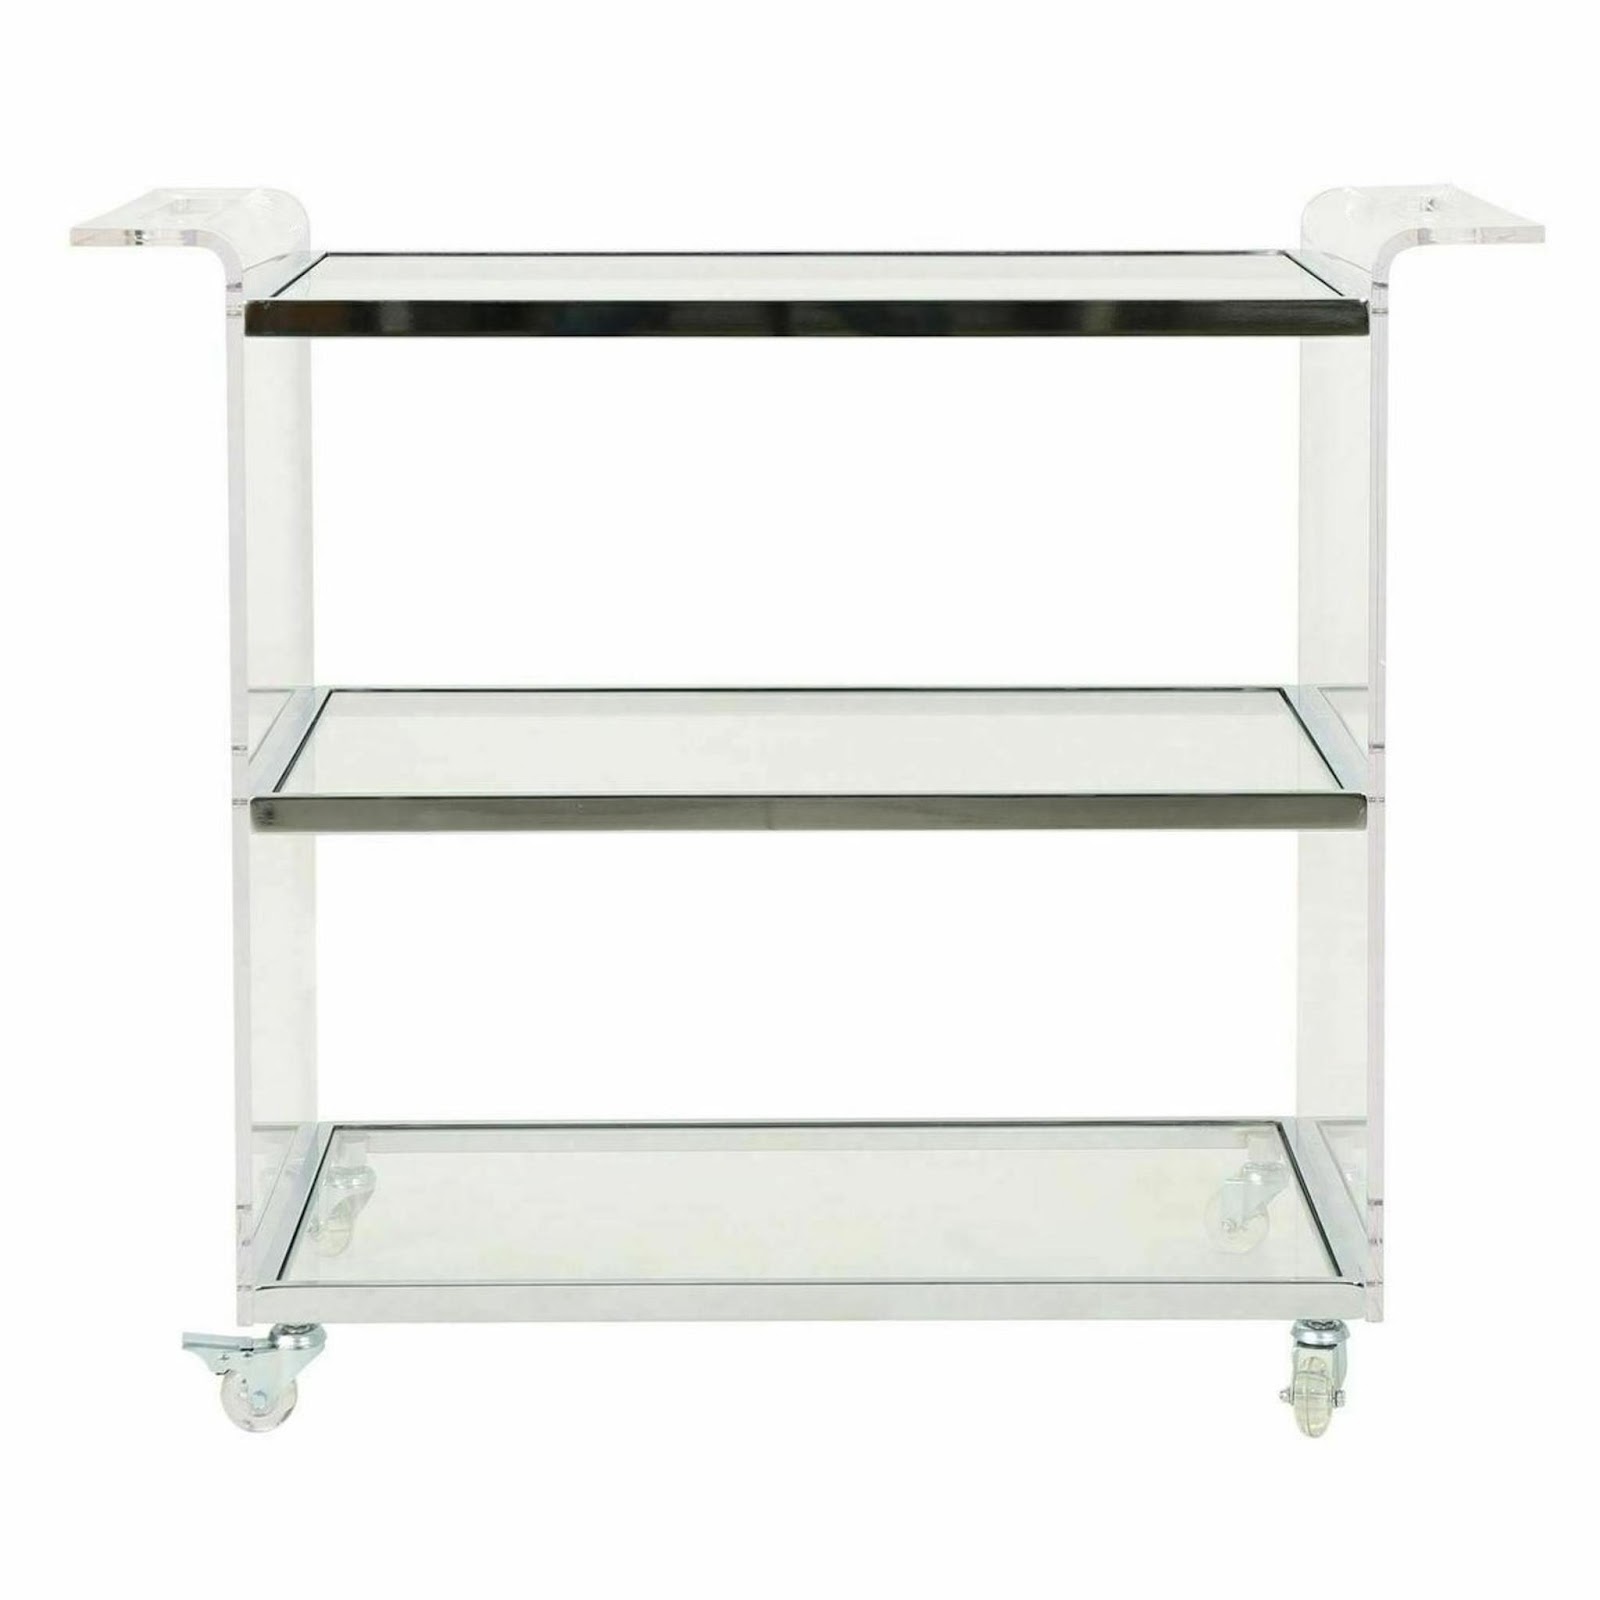 The lucite bar trolley with flair handles is HOT in 2023.